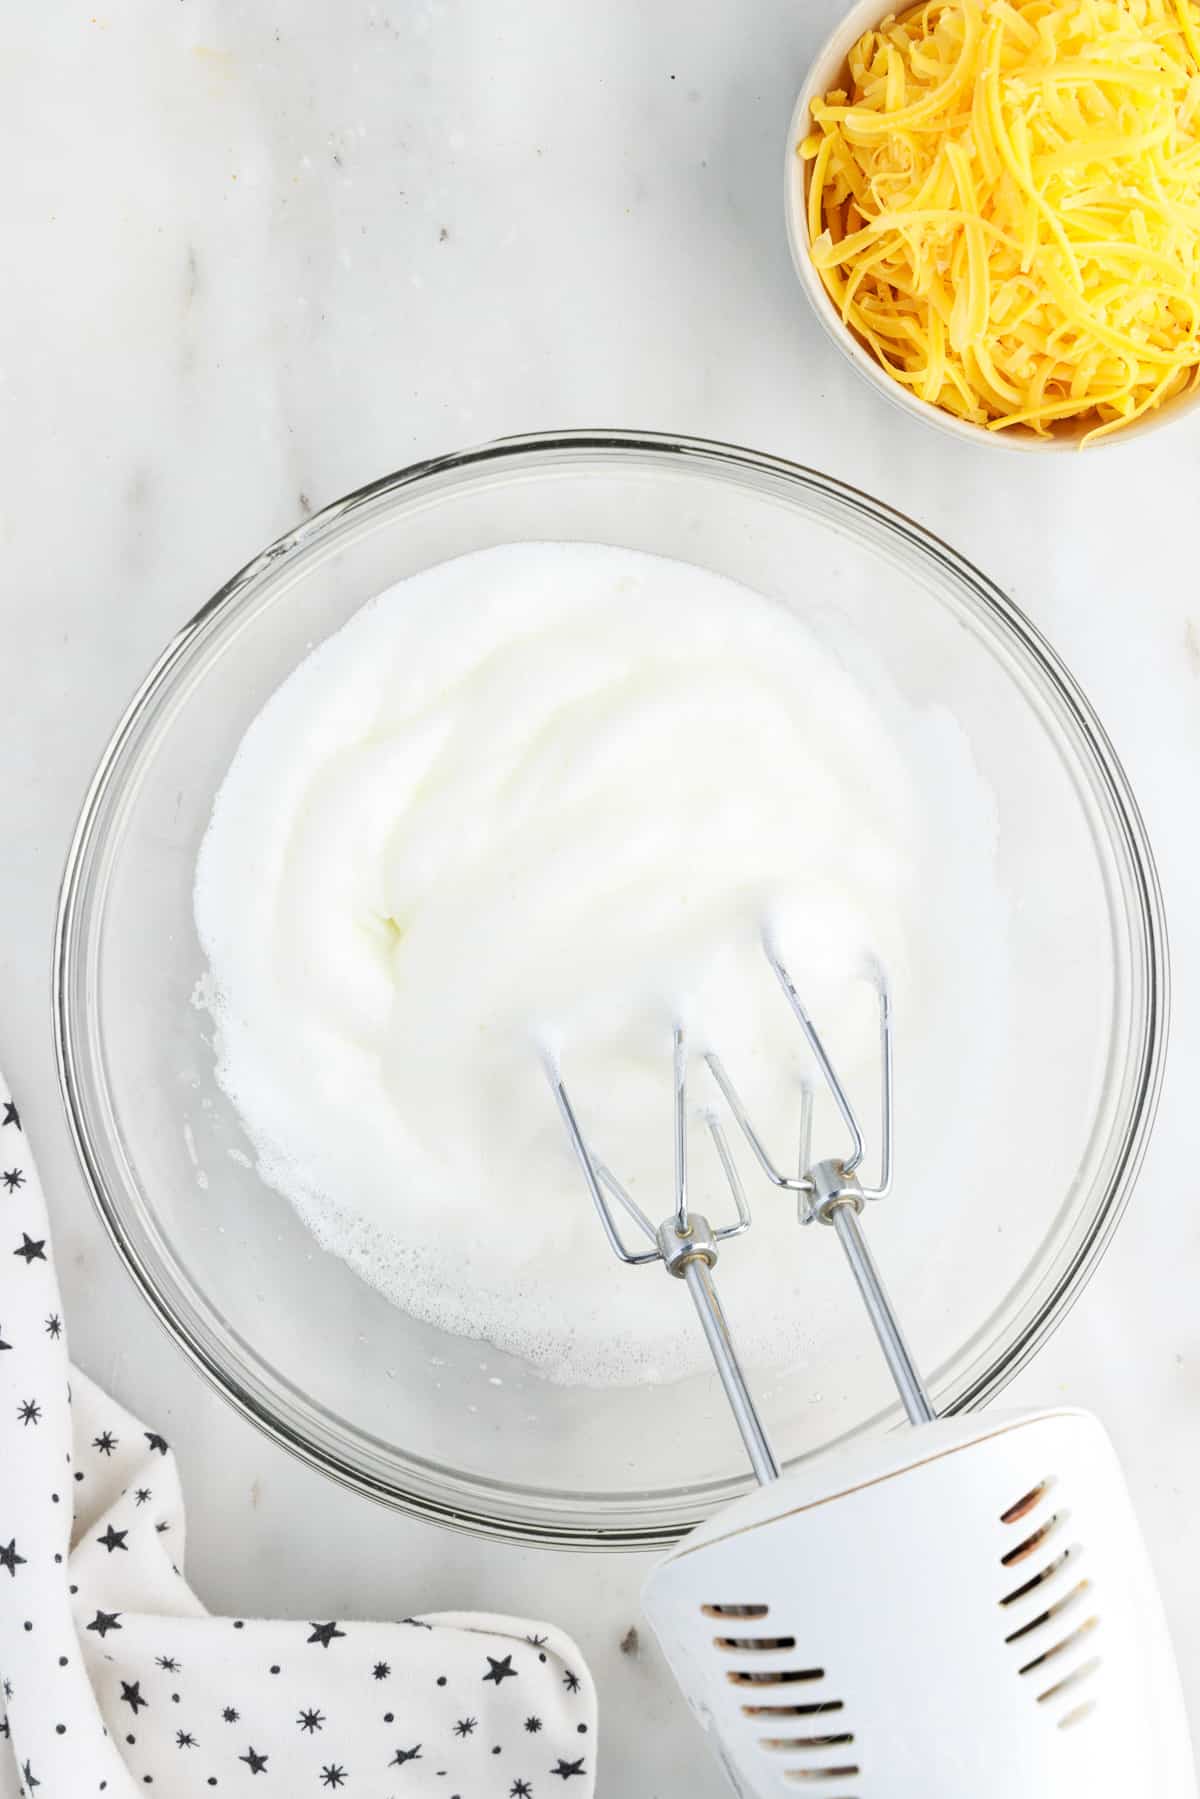 Stiff egg whites in a mixing bowl with mixer inserted next to a bowl of cheese.